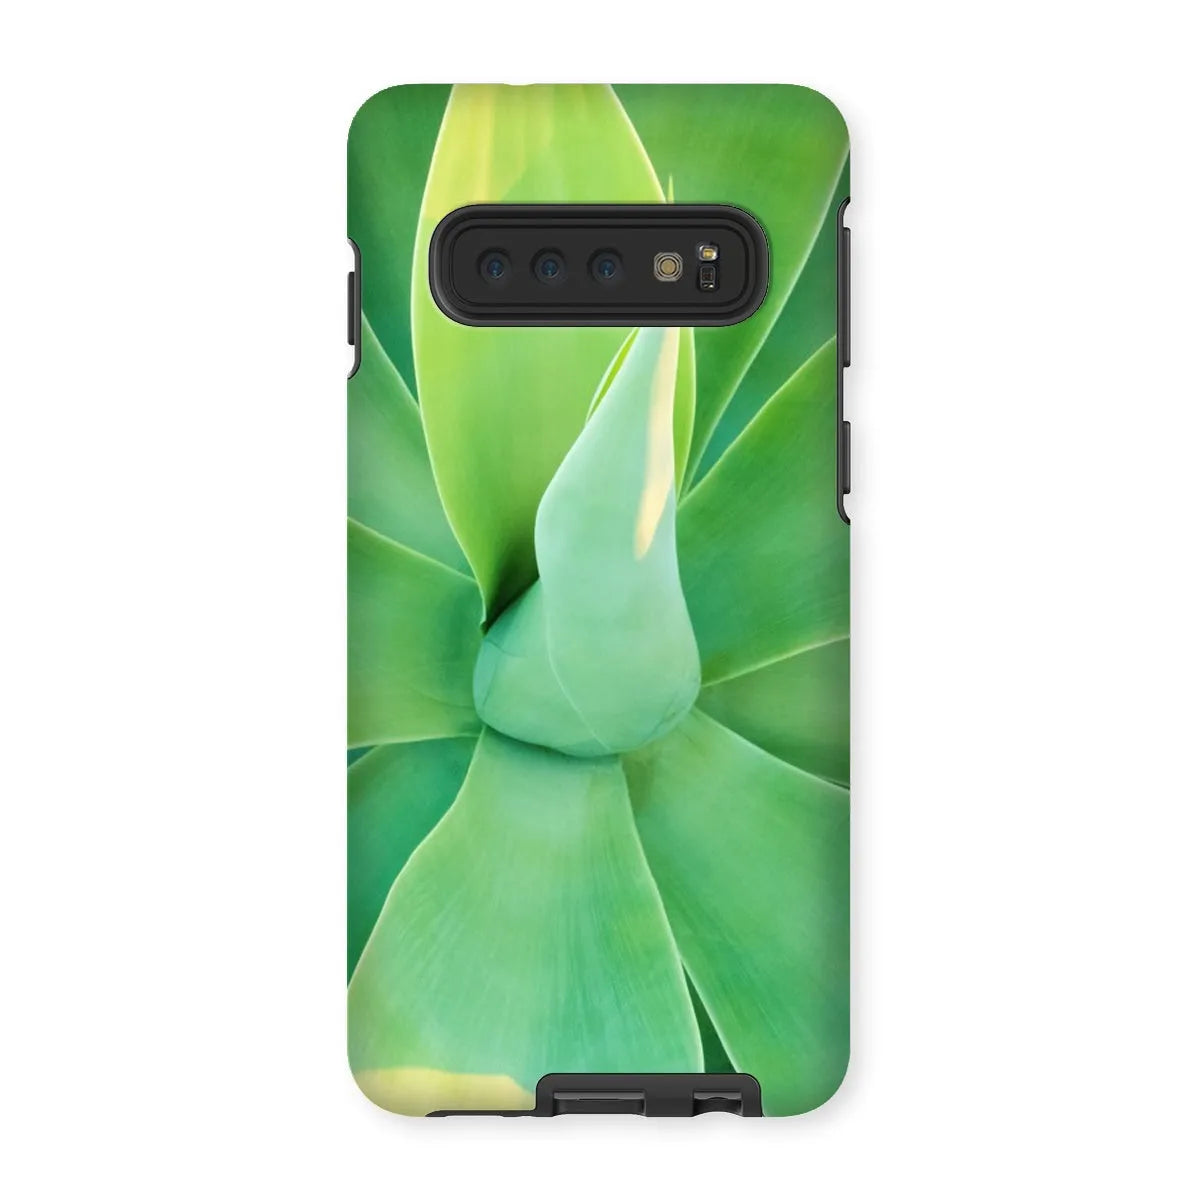 In Bloom Too Tough Phone Case - Samsung Galaxy S10 / Matte - Mobile Phone Cases - Aesthetic Art